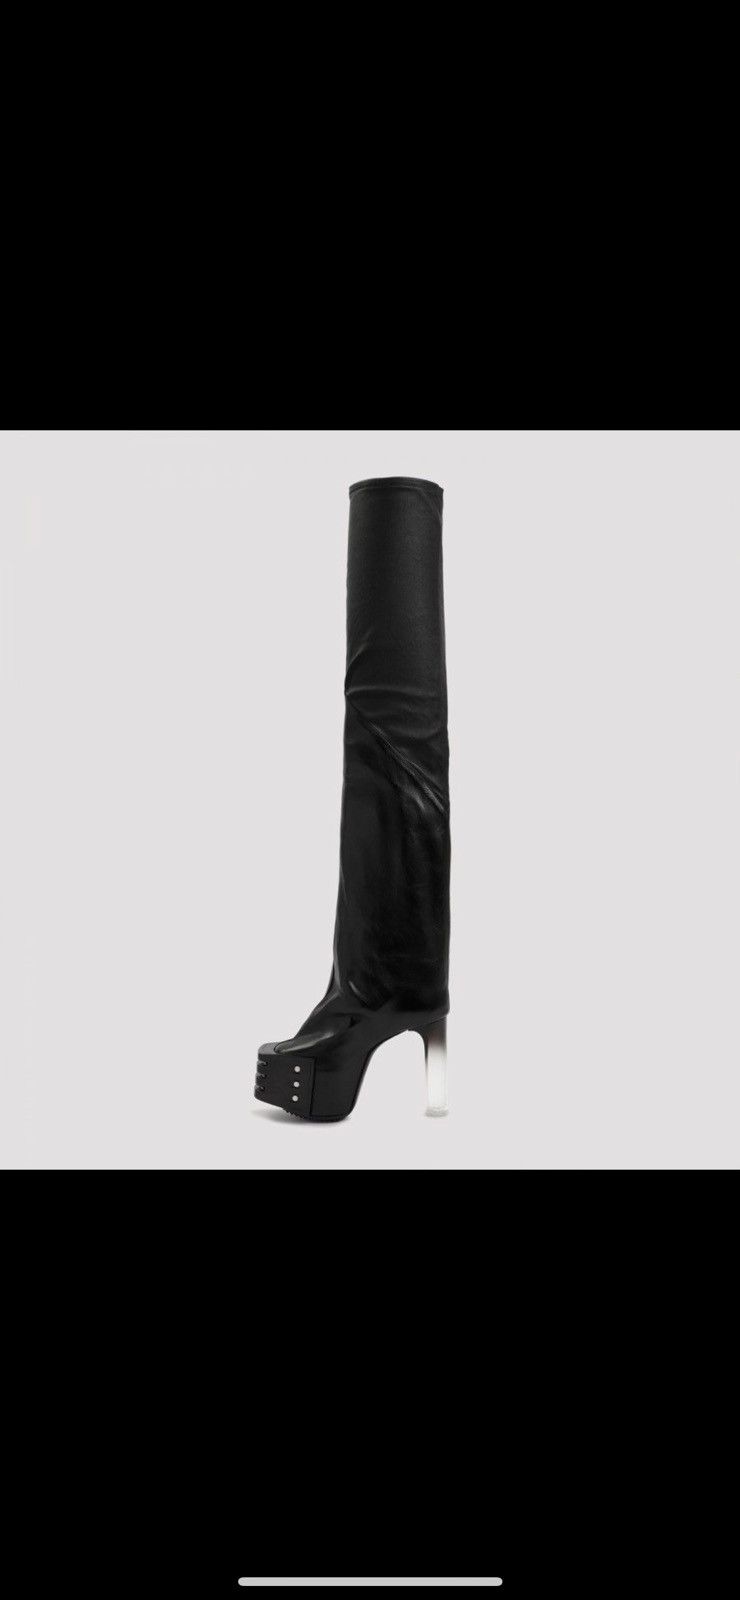 Rick Owens Rick Owens boots | Grailed